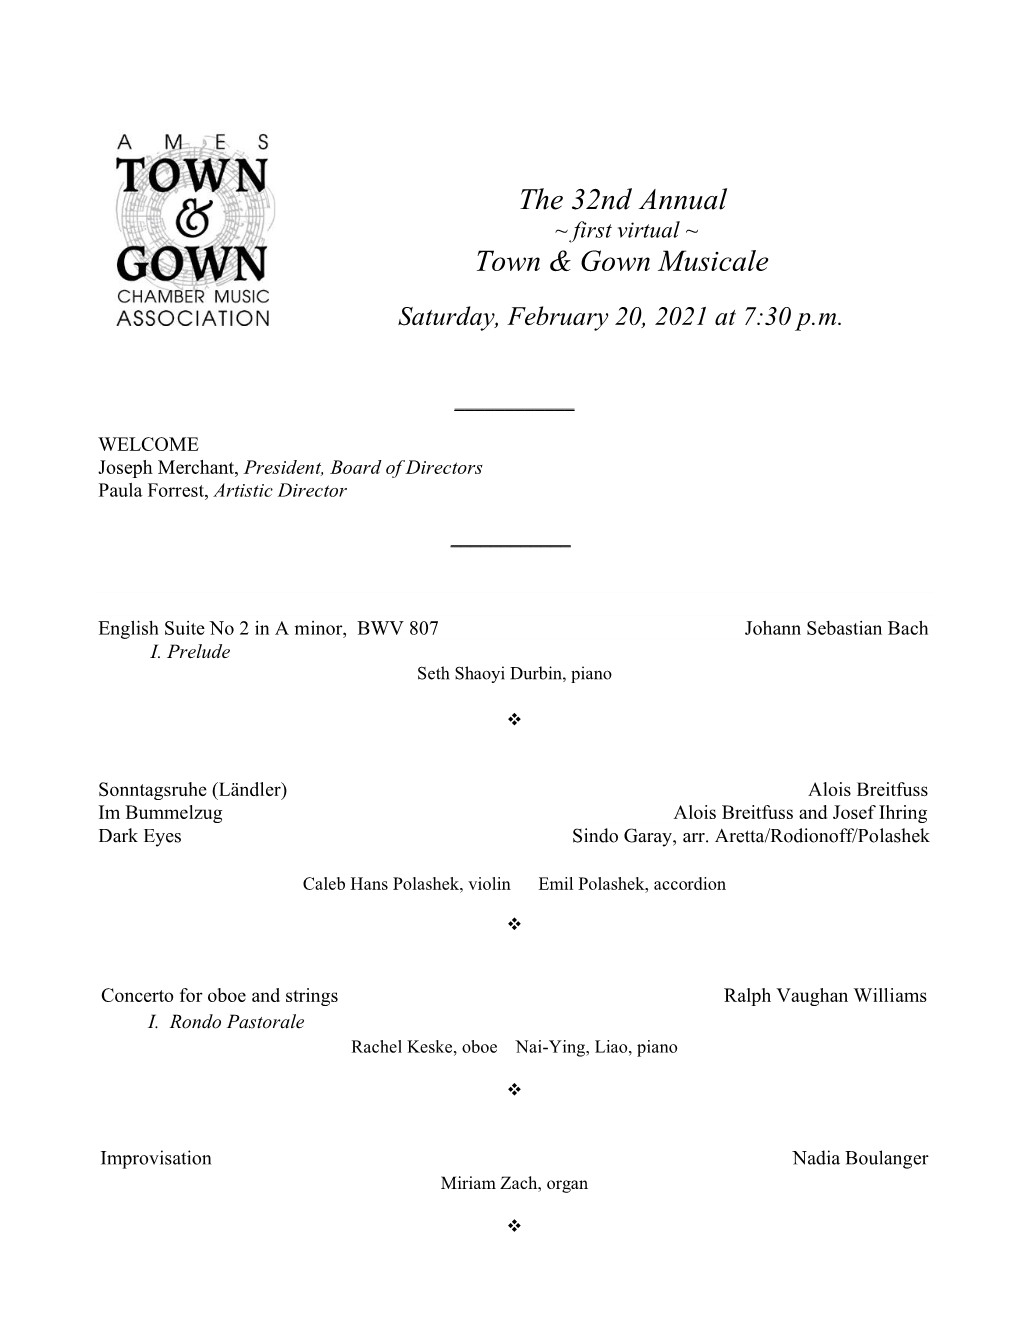 The 32Nd Annual Town & Gown Musicale